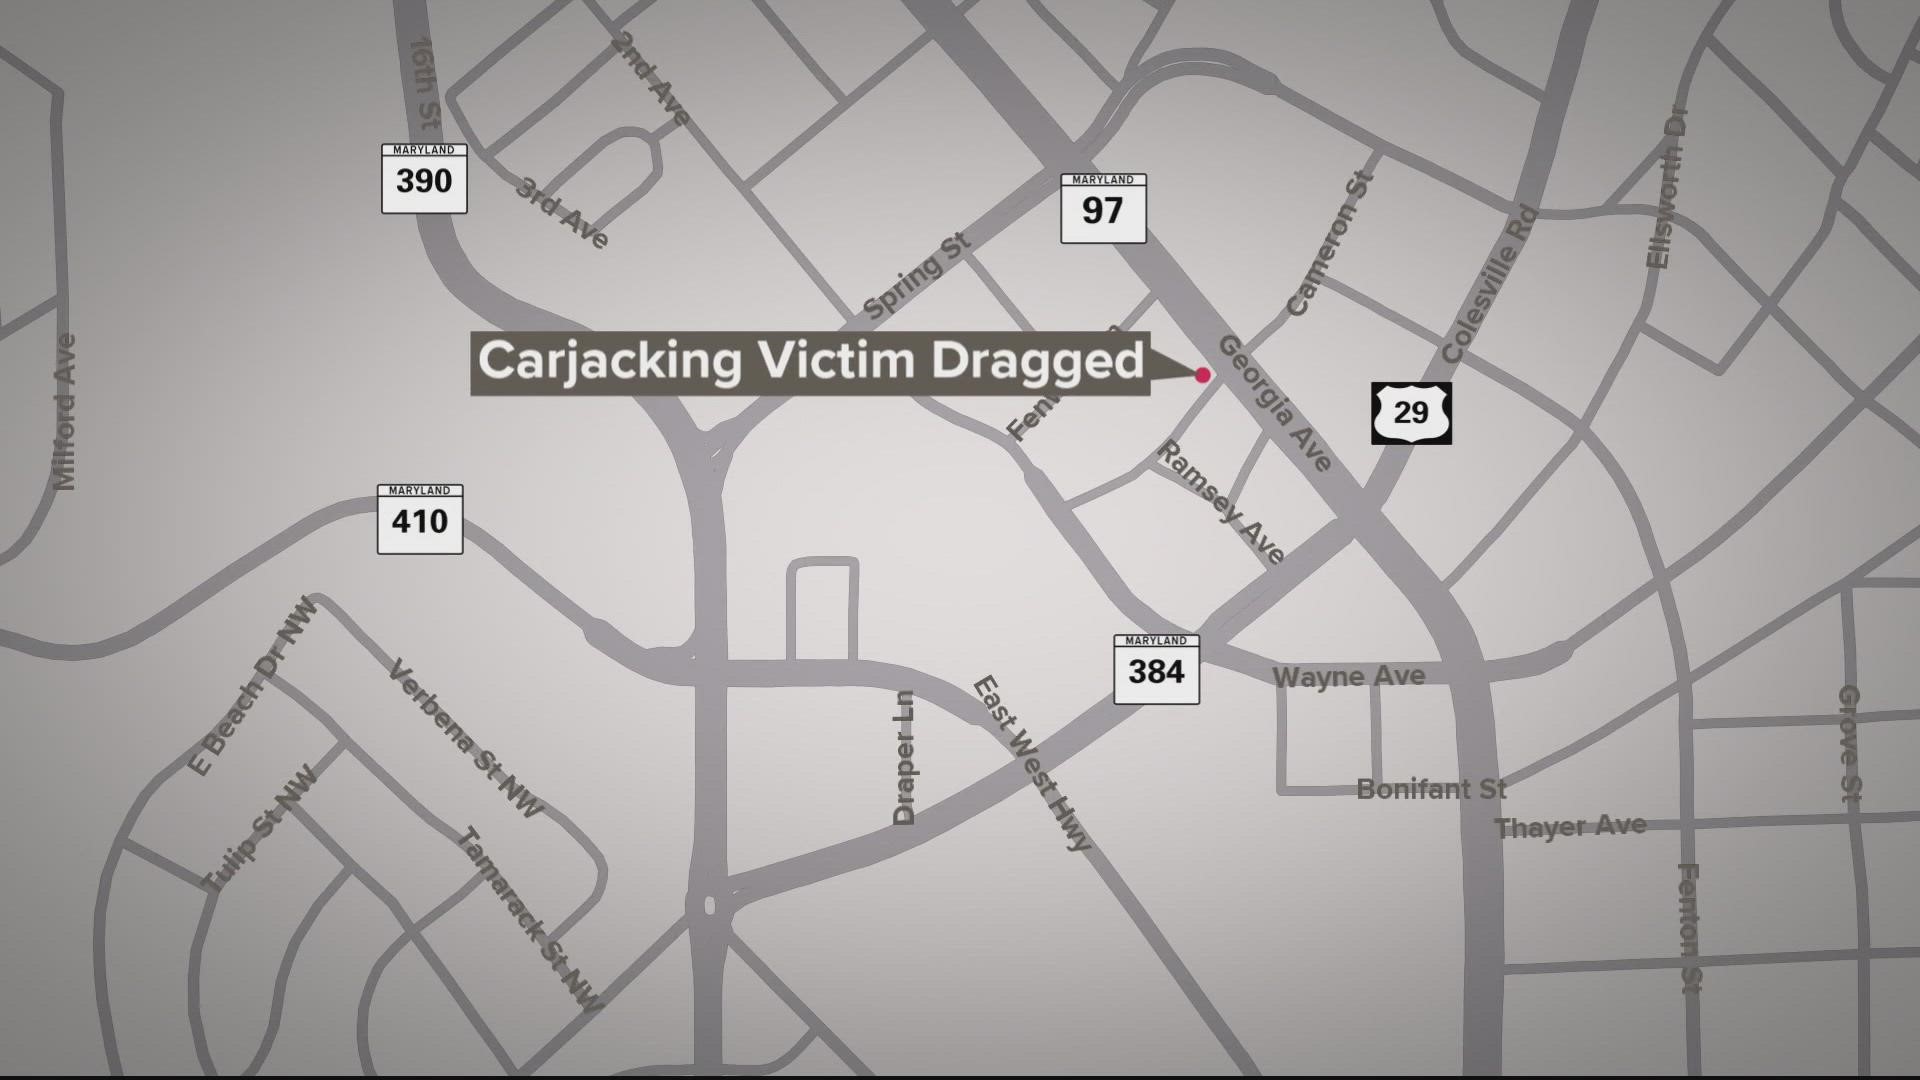 Montgomery County police responded to a reported carjacking that left a driver injured Tuesday evening.